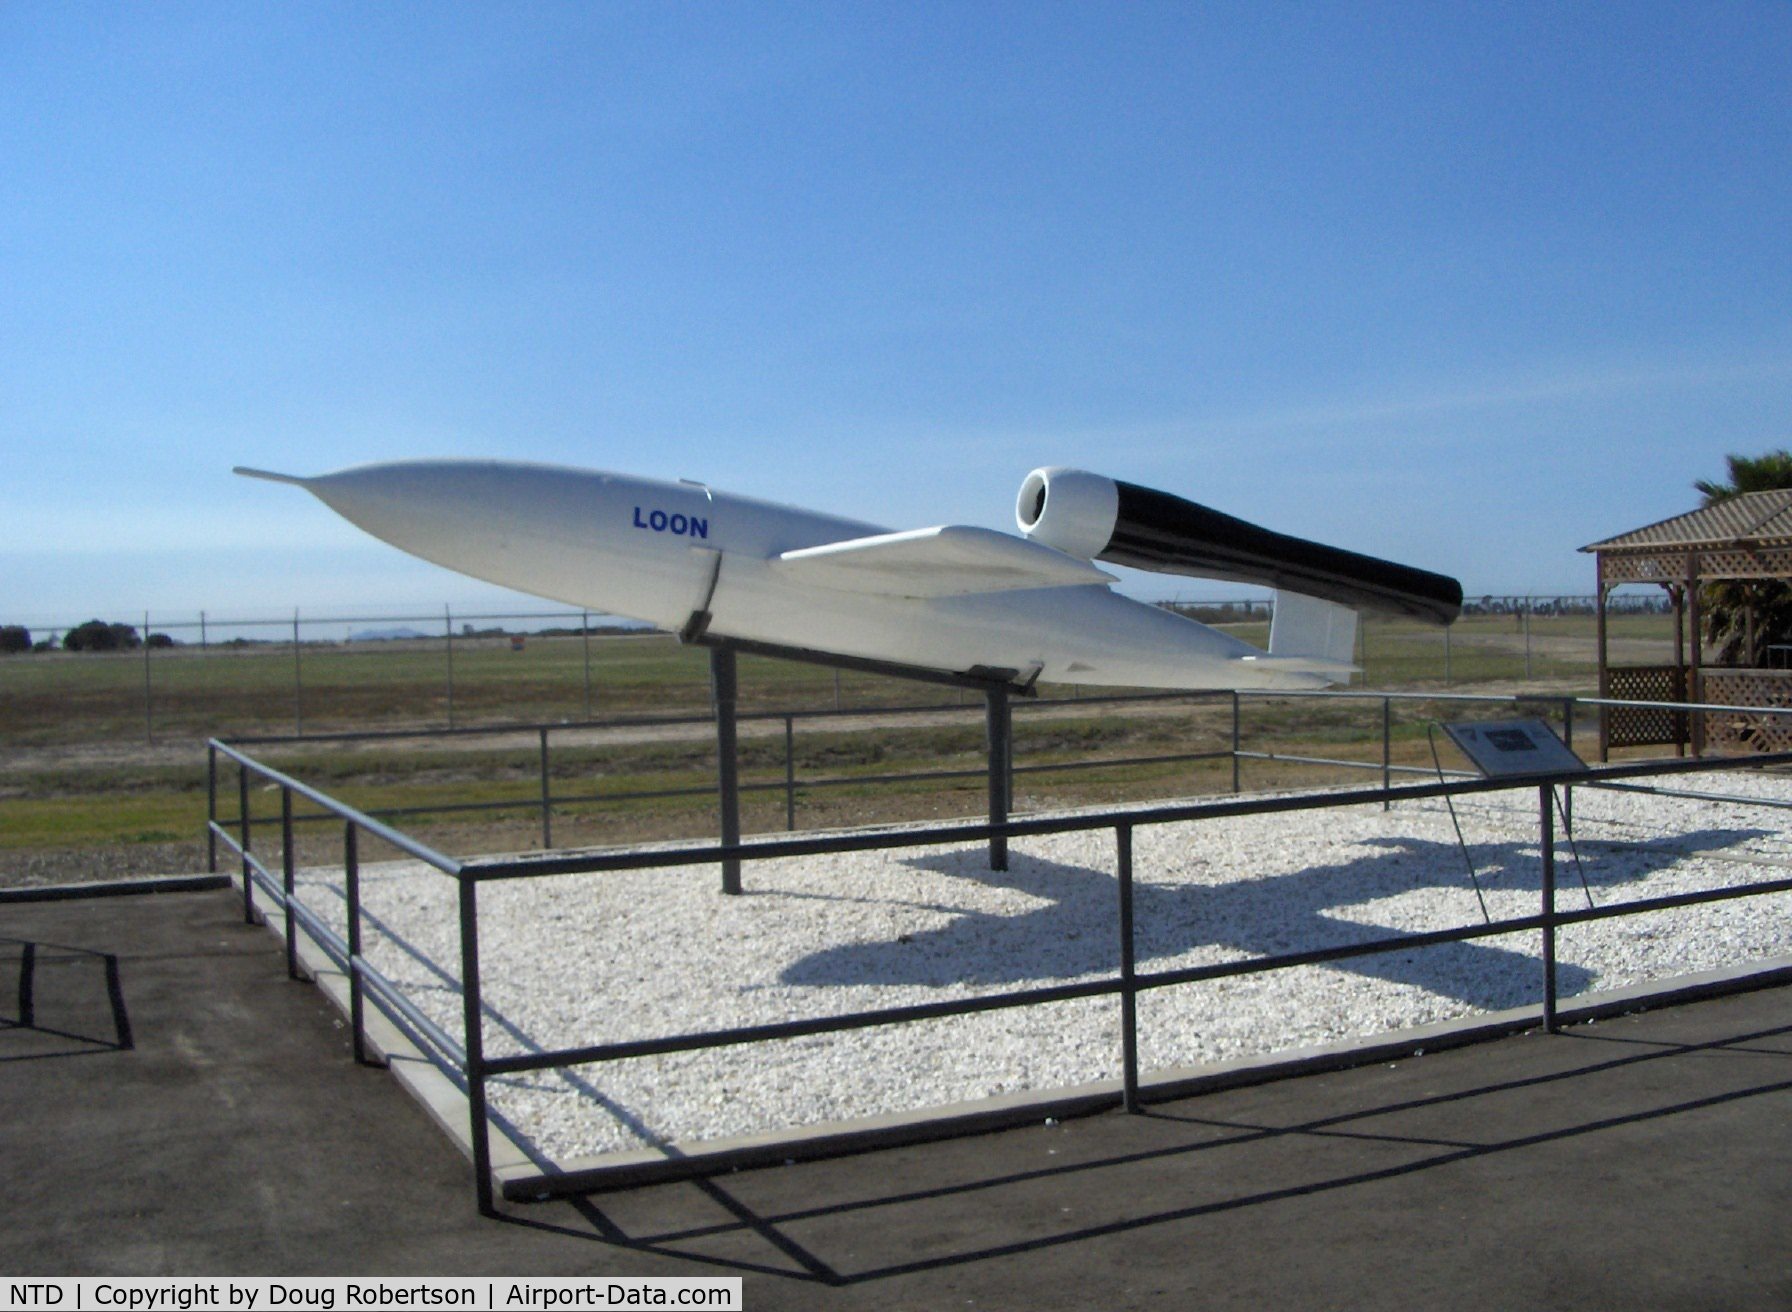 Point Mugu Nas (naval Base Ventura Co) Airport (NTD) - Missile Park-KUW-1/KGW/LTV-N-2 LOON surface to surface copy of German V-1 pulse jet 'buzz bomb' of WWII. 25' long, 19' wingspan, 1,540 lb warhead. 150 mile range. Program ended at Point Mugu 1949, used 'Operation Paperclip' German rocket scientists